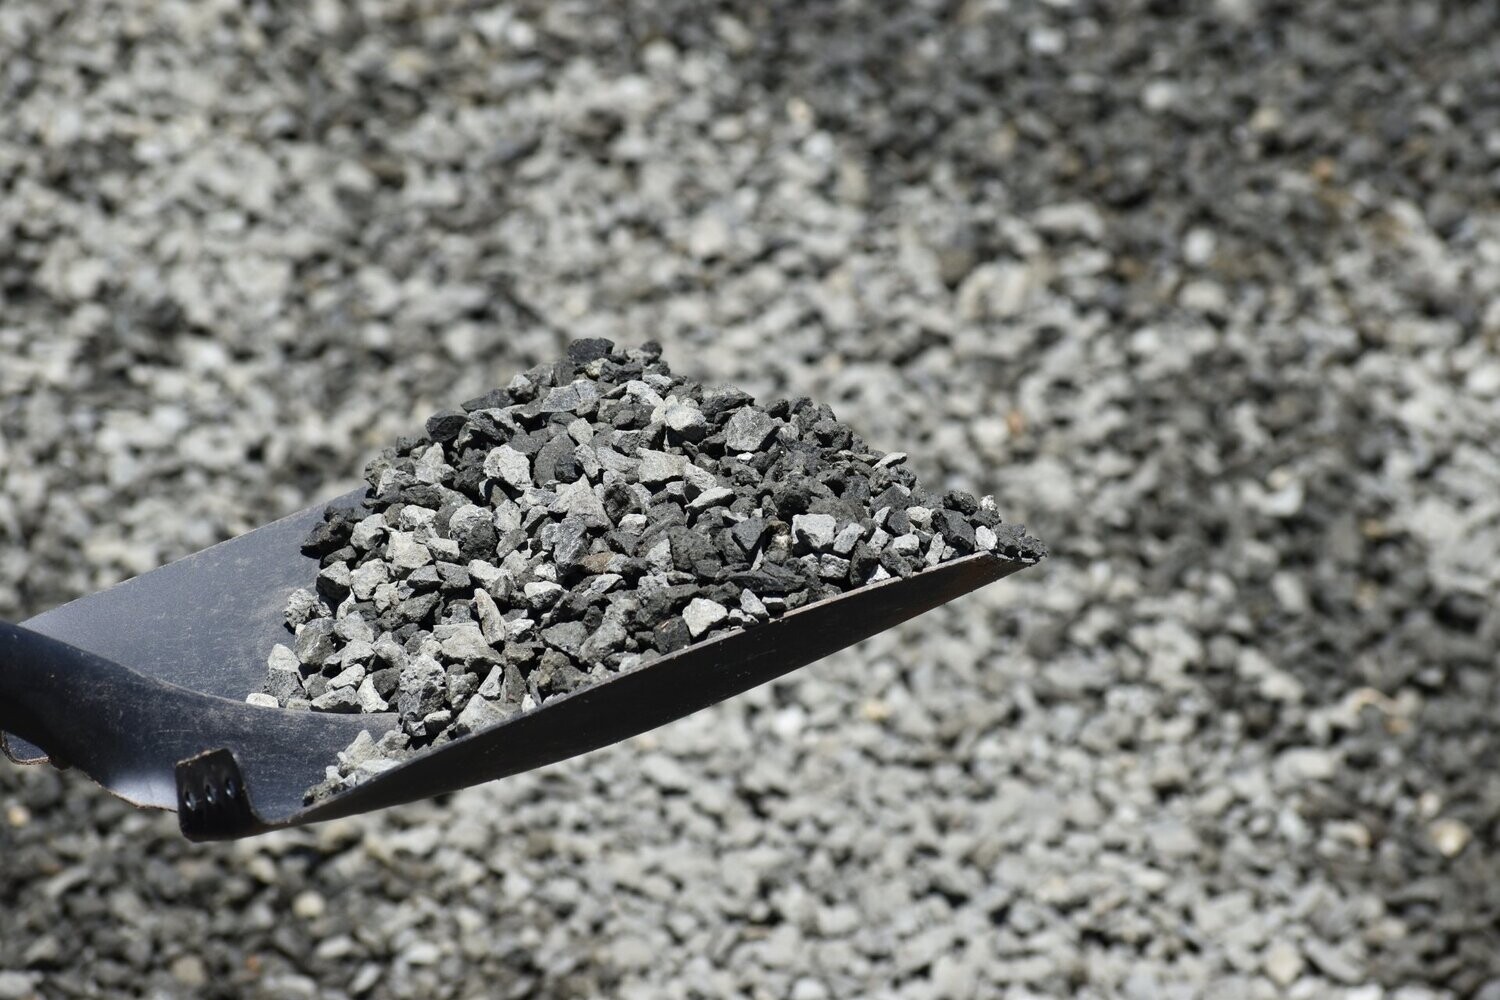 Aggregate (was $47.00 - May promotion)